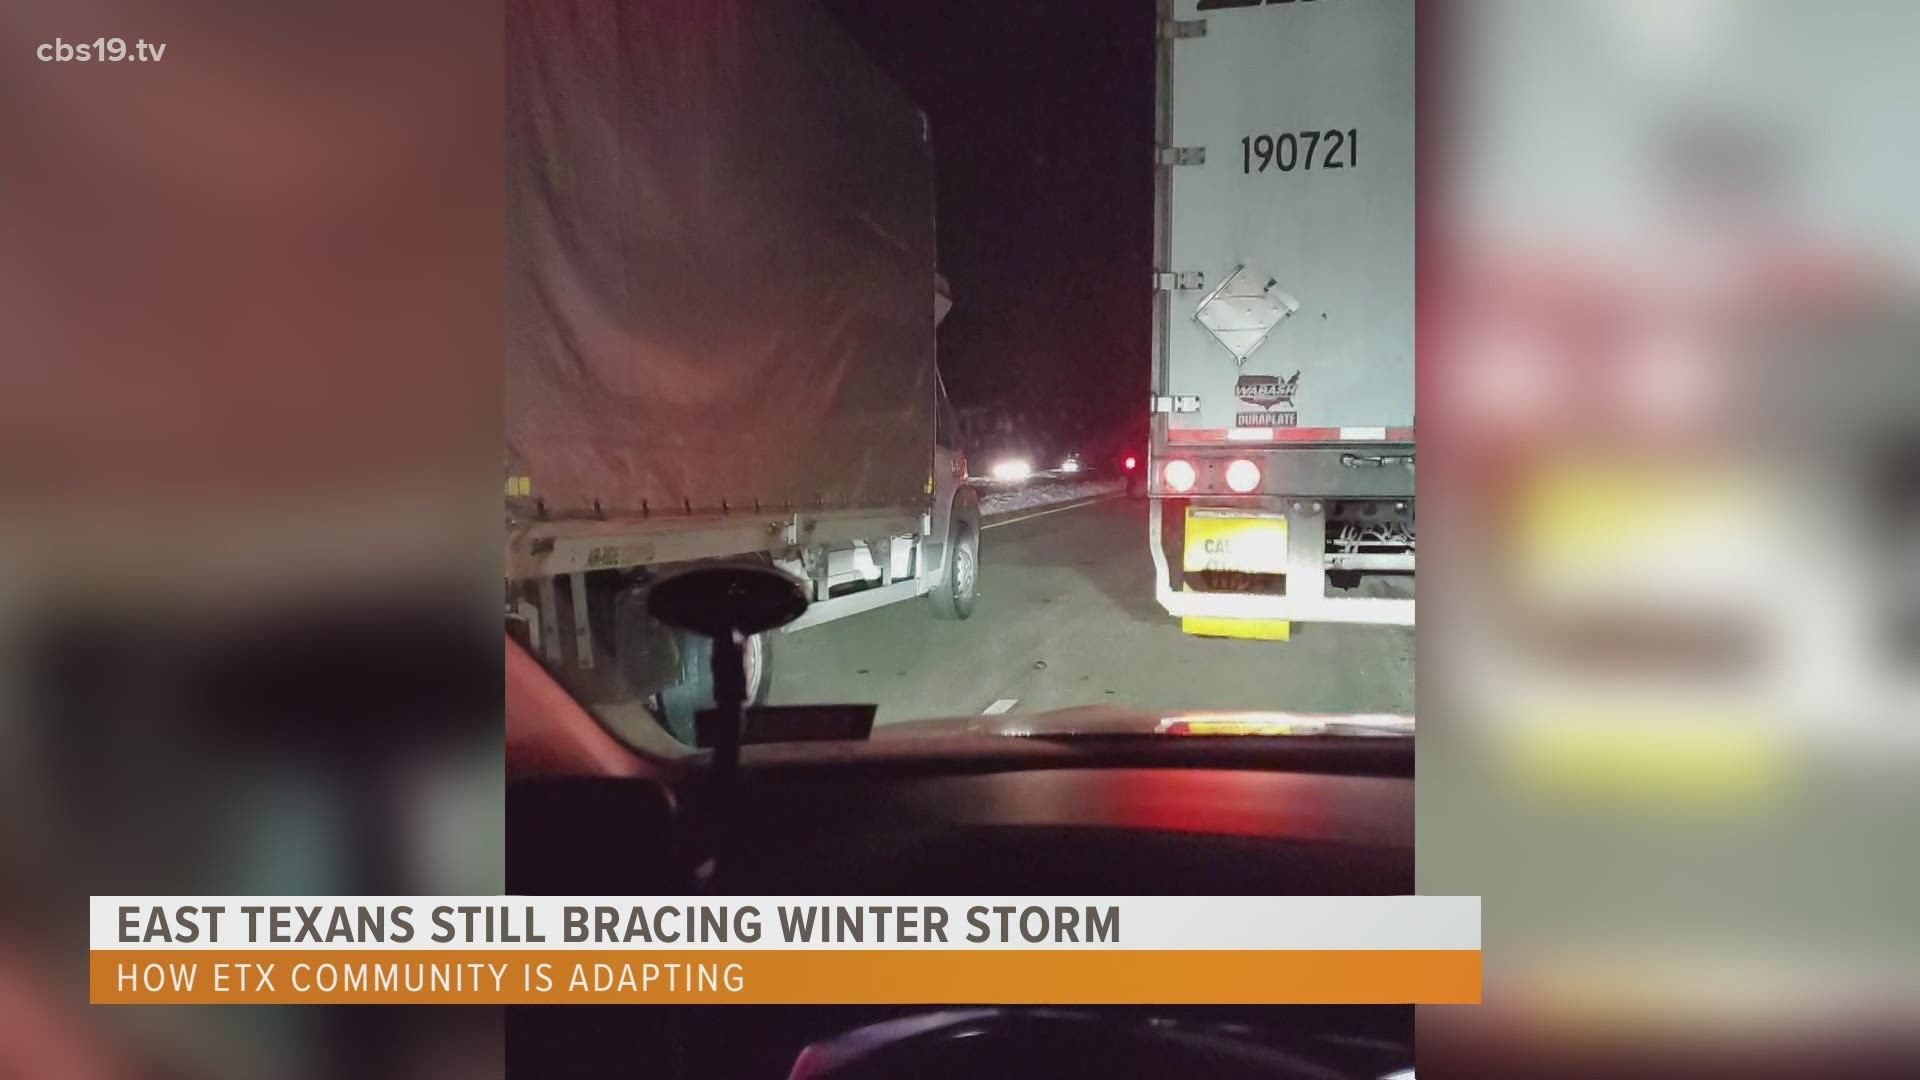 Commuters spend the night at a standstill along I-20 due to major backup caused by icy roads, East Texans continue to adapt to winter storm